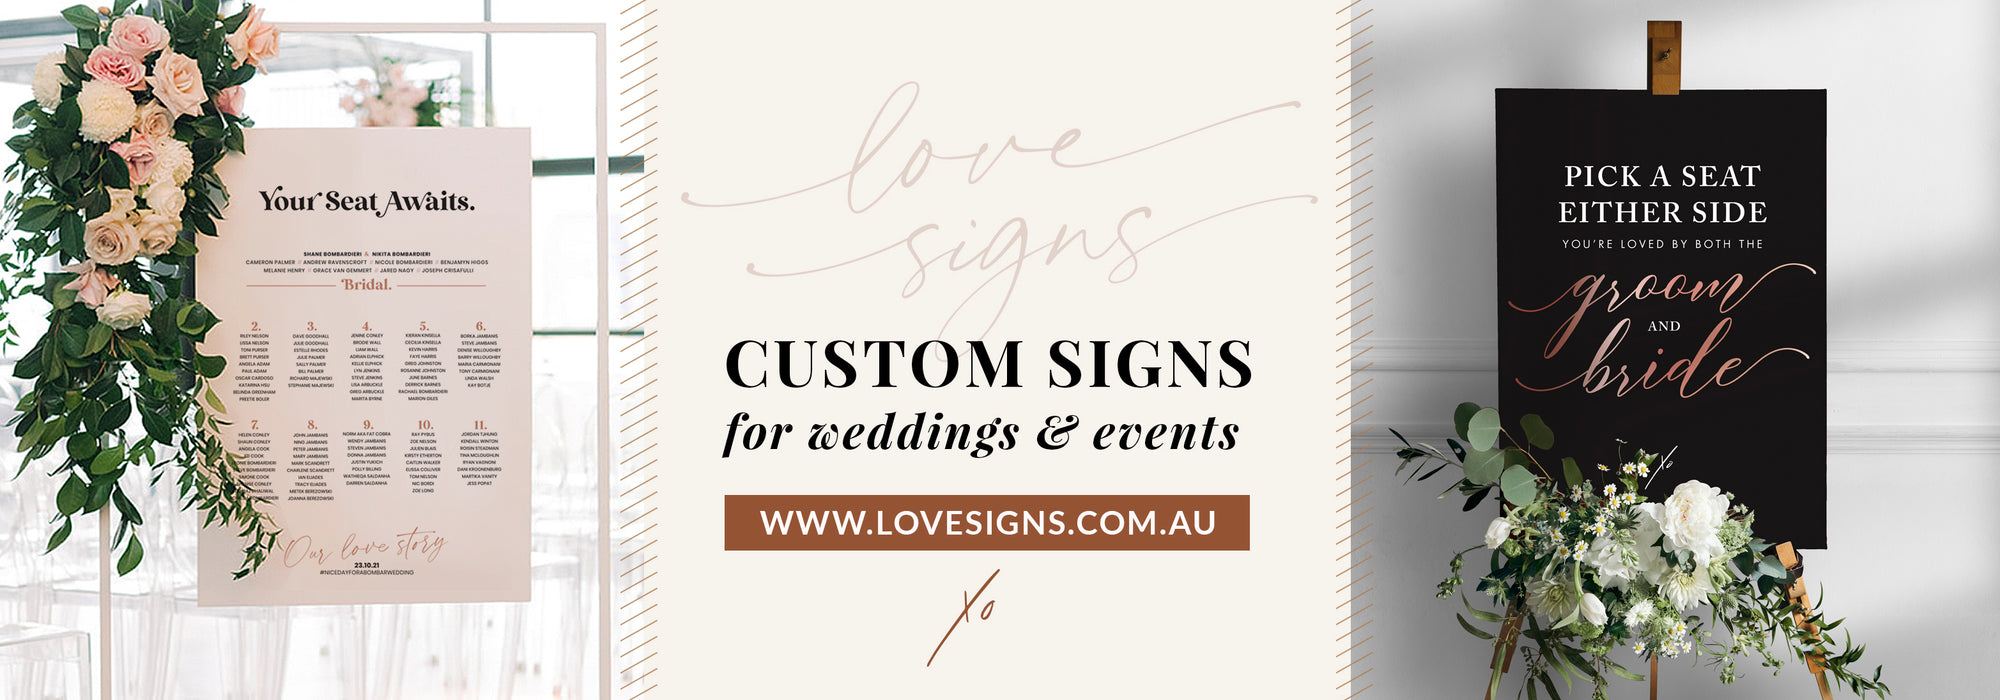 We work with event planners, designers, and brides and grooms from all over Australia to create signage for every occassion. Acrylic Signs, Wedding Signs, Wedding Welcome Signs, Acrylic Wedding Signs, Seating Signs, Seating Charts, Event Signage and more!